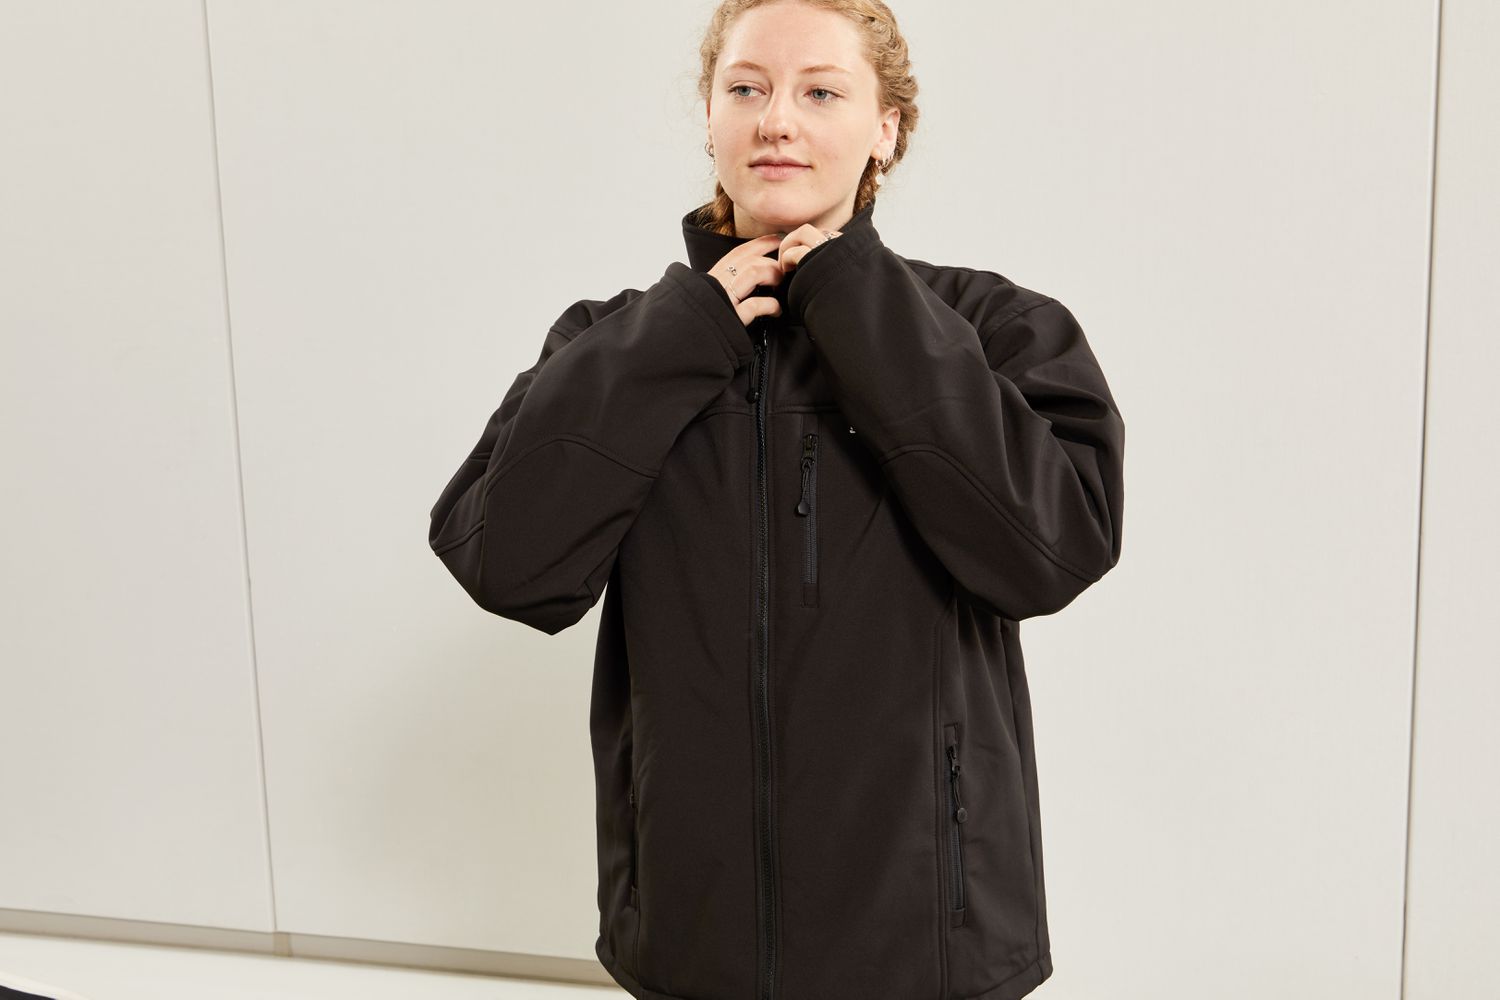 Person zipping up the Smarkey heated jacket